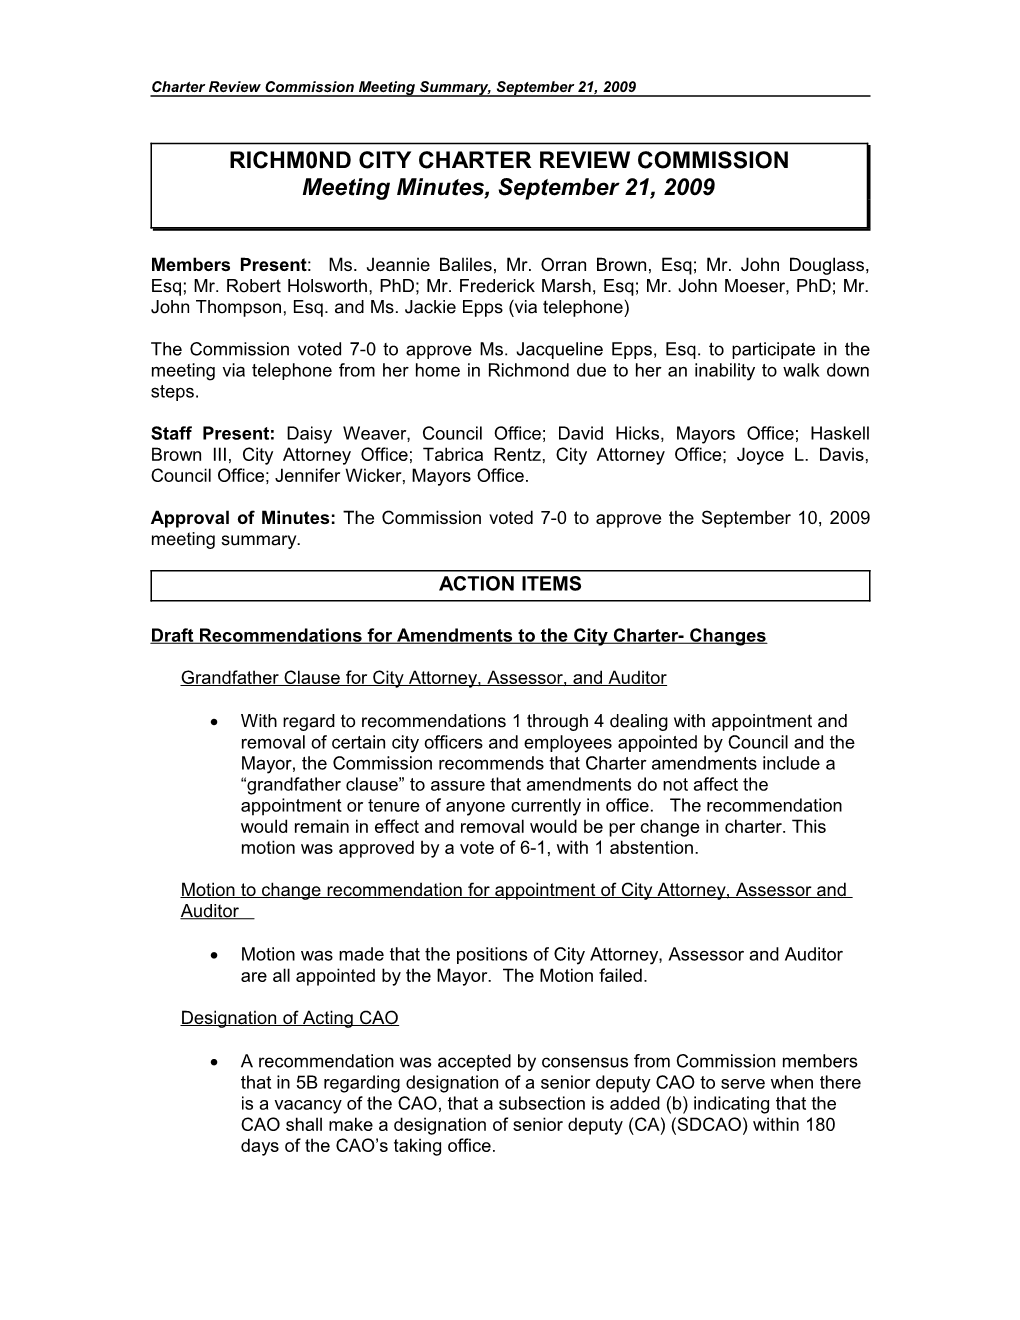 Charter Review Commission Meeting Summary, September 10, 2009